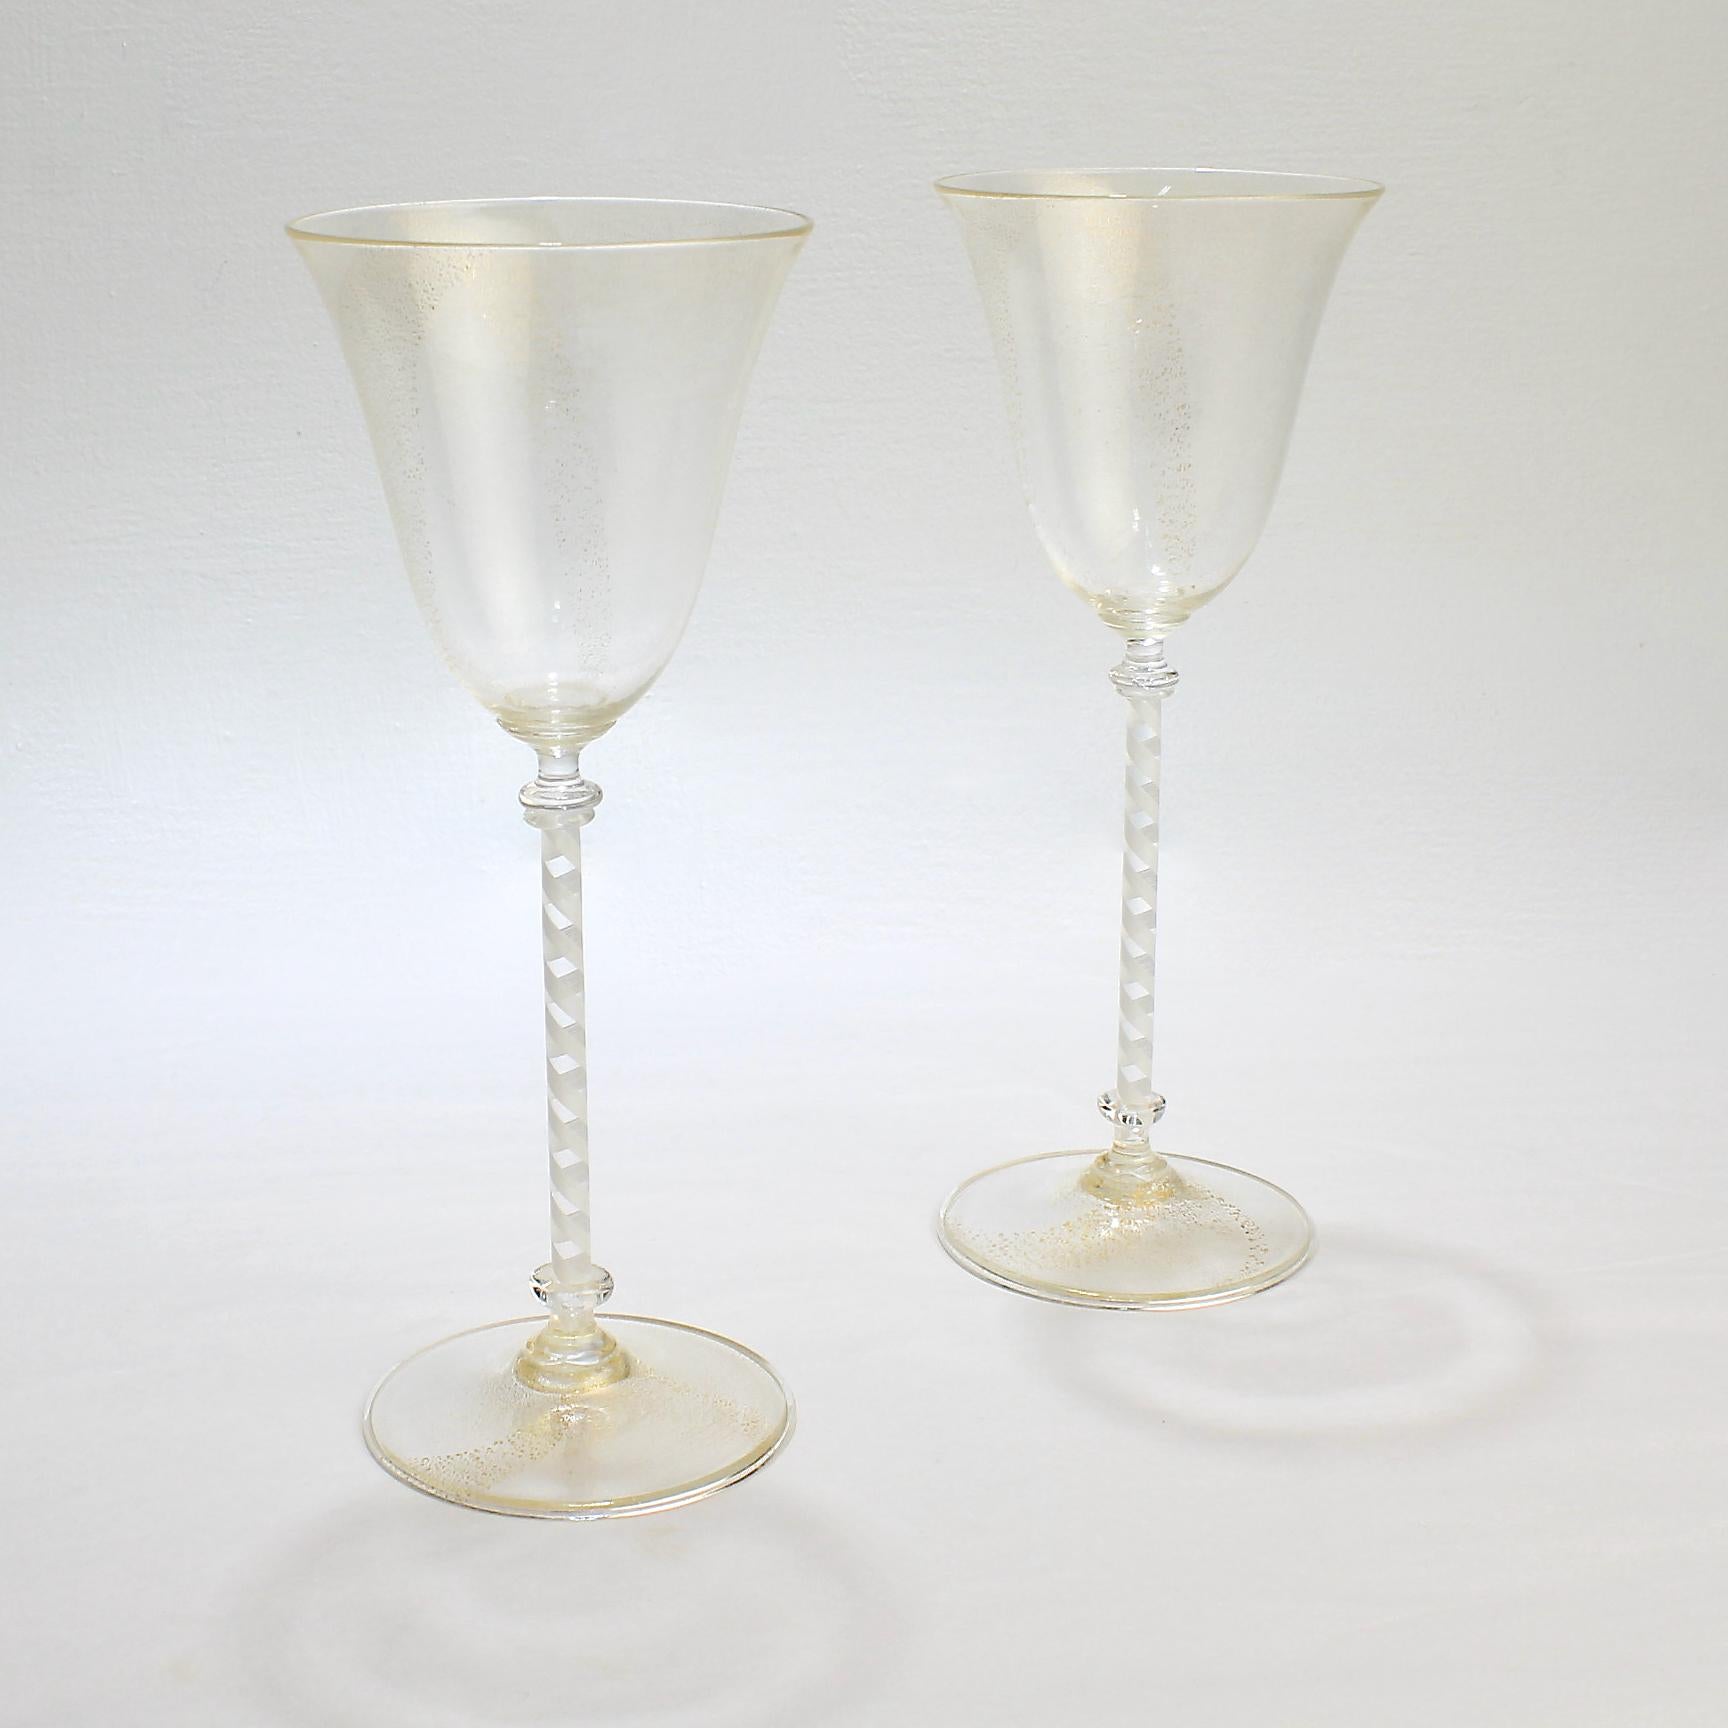 A very fine pair of vintage Venetian or Murano glass wine goblets.

Attributed to Salviati. 

The bowls and feet have gold inclusions, and the stem is built on a twisted white filigrana cane. 

Simple and refined wine stems that are perfect